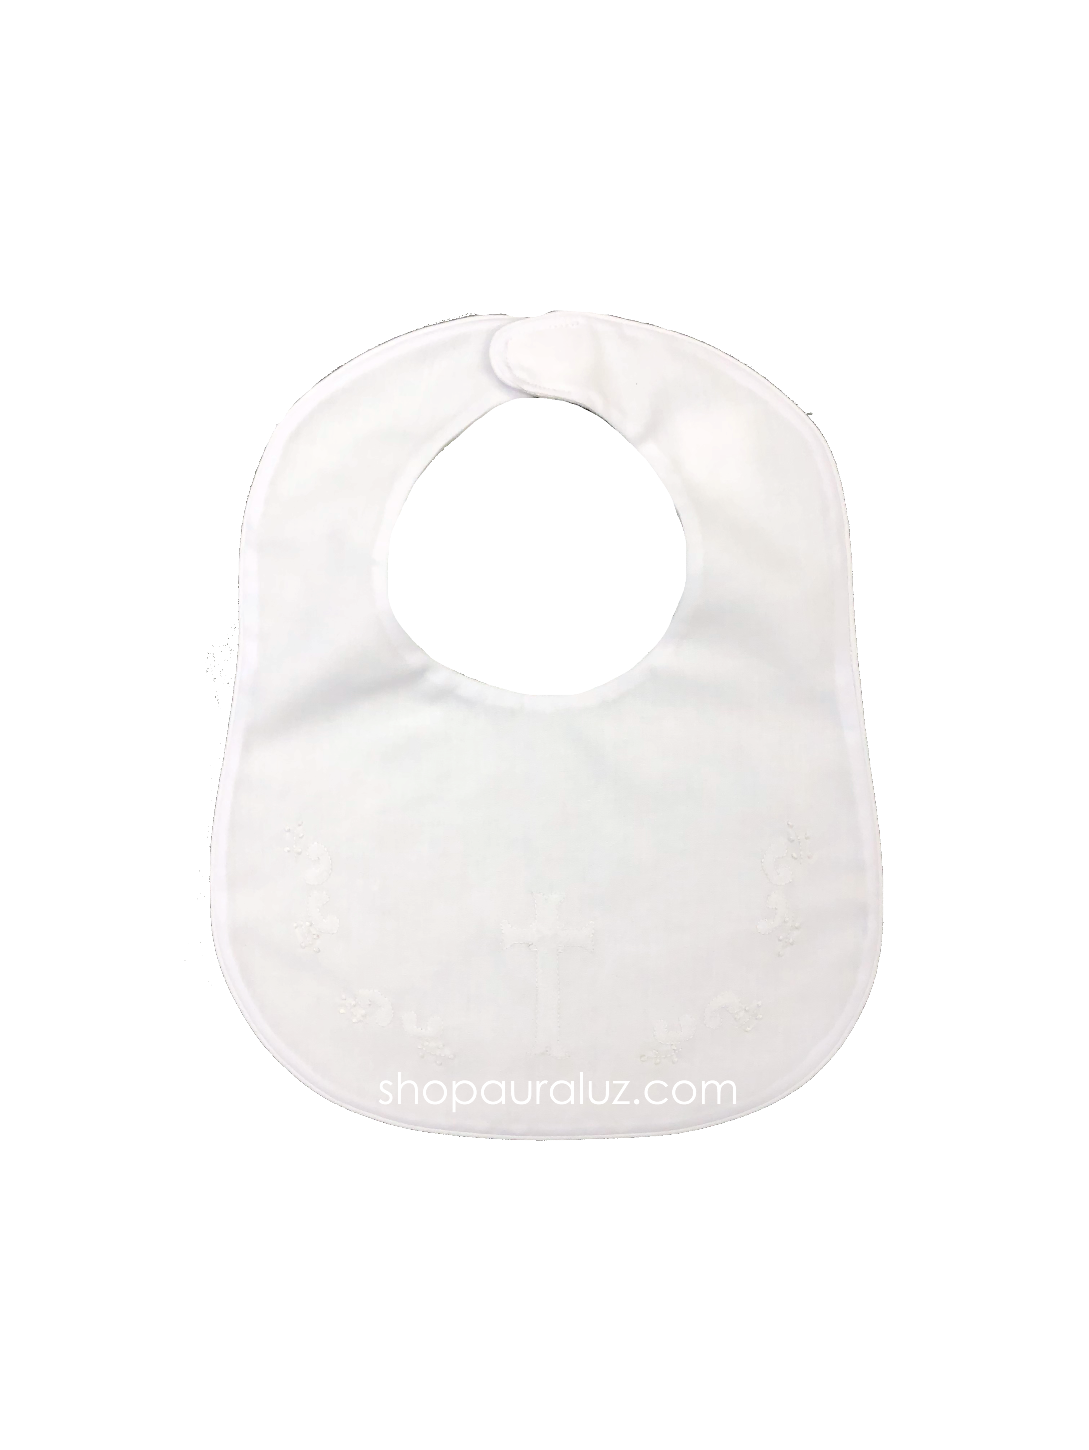 Auraluz Bib...White with white binding trim and embroidered cross